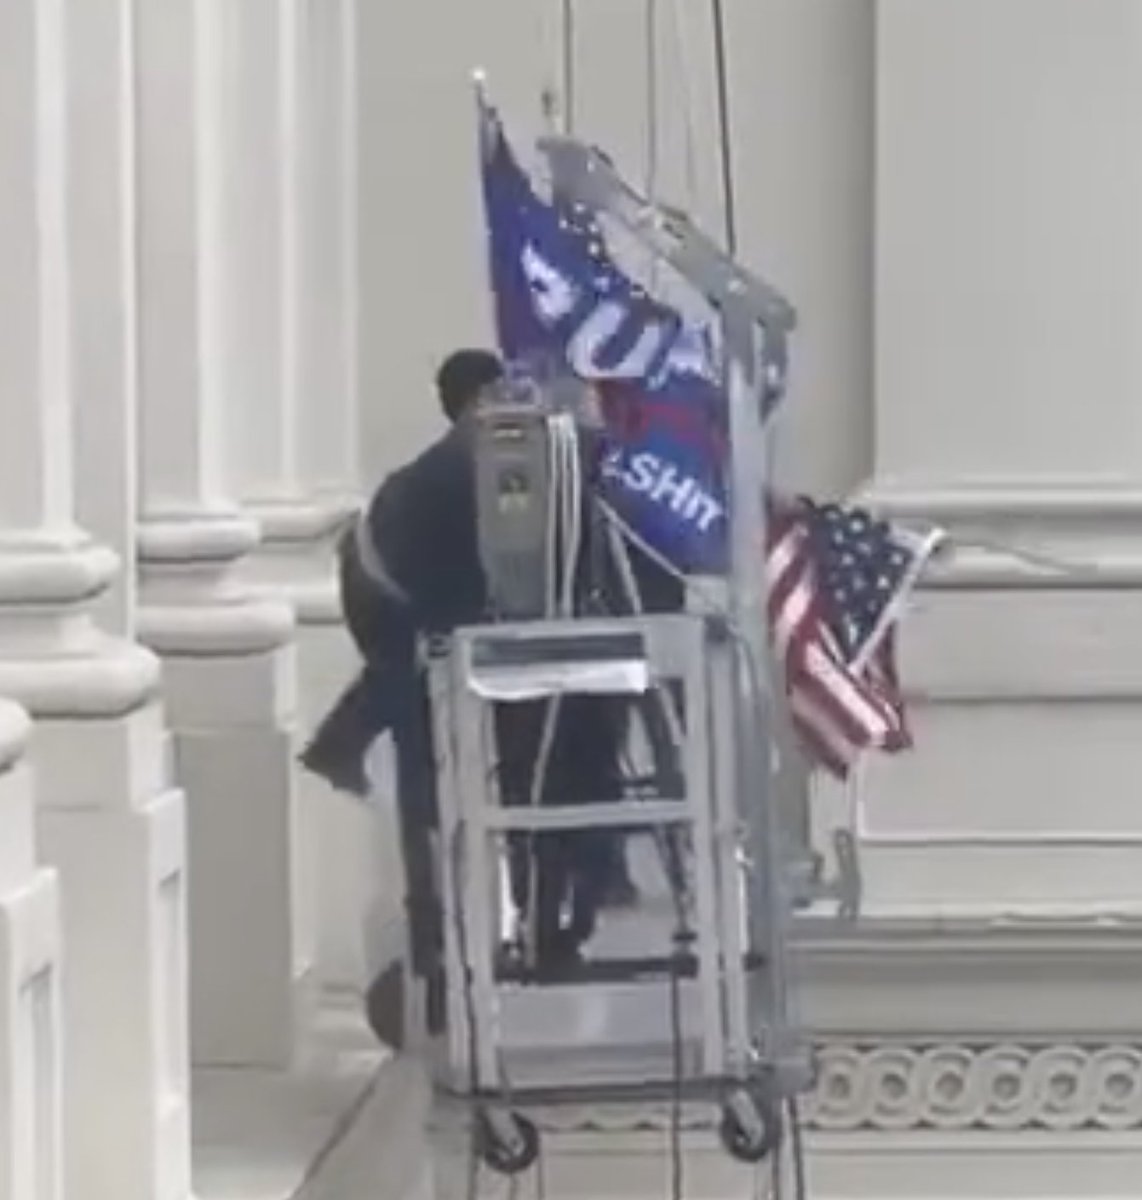 There were so many horrifying events that took place during the Jan 6th Trump/MAGA insurrection. I always go back to the moment when the MAGA insurrectionists tore down the American flag on the US Capitol and replaced it with a Trump flag. It was profoundly horrifying.